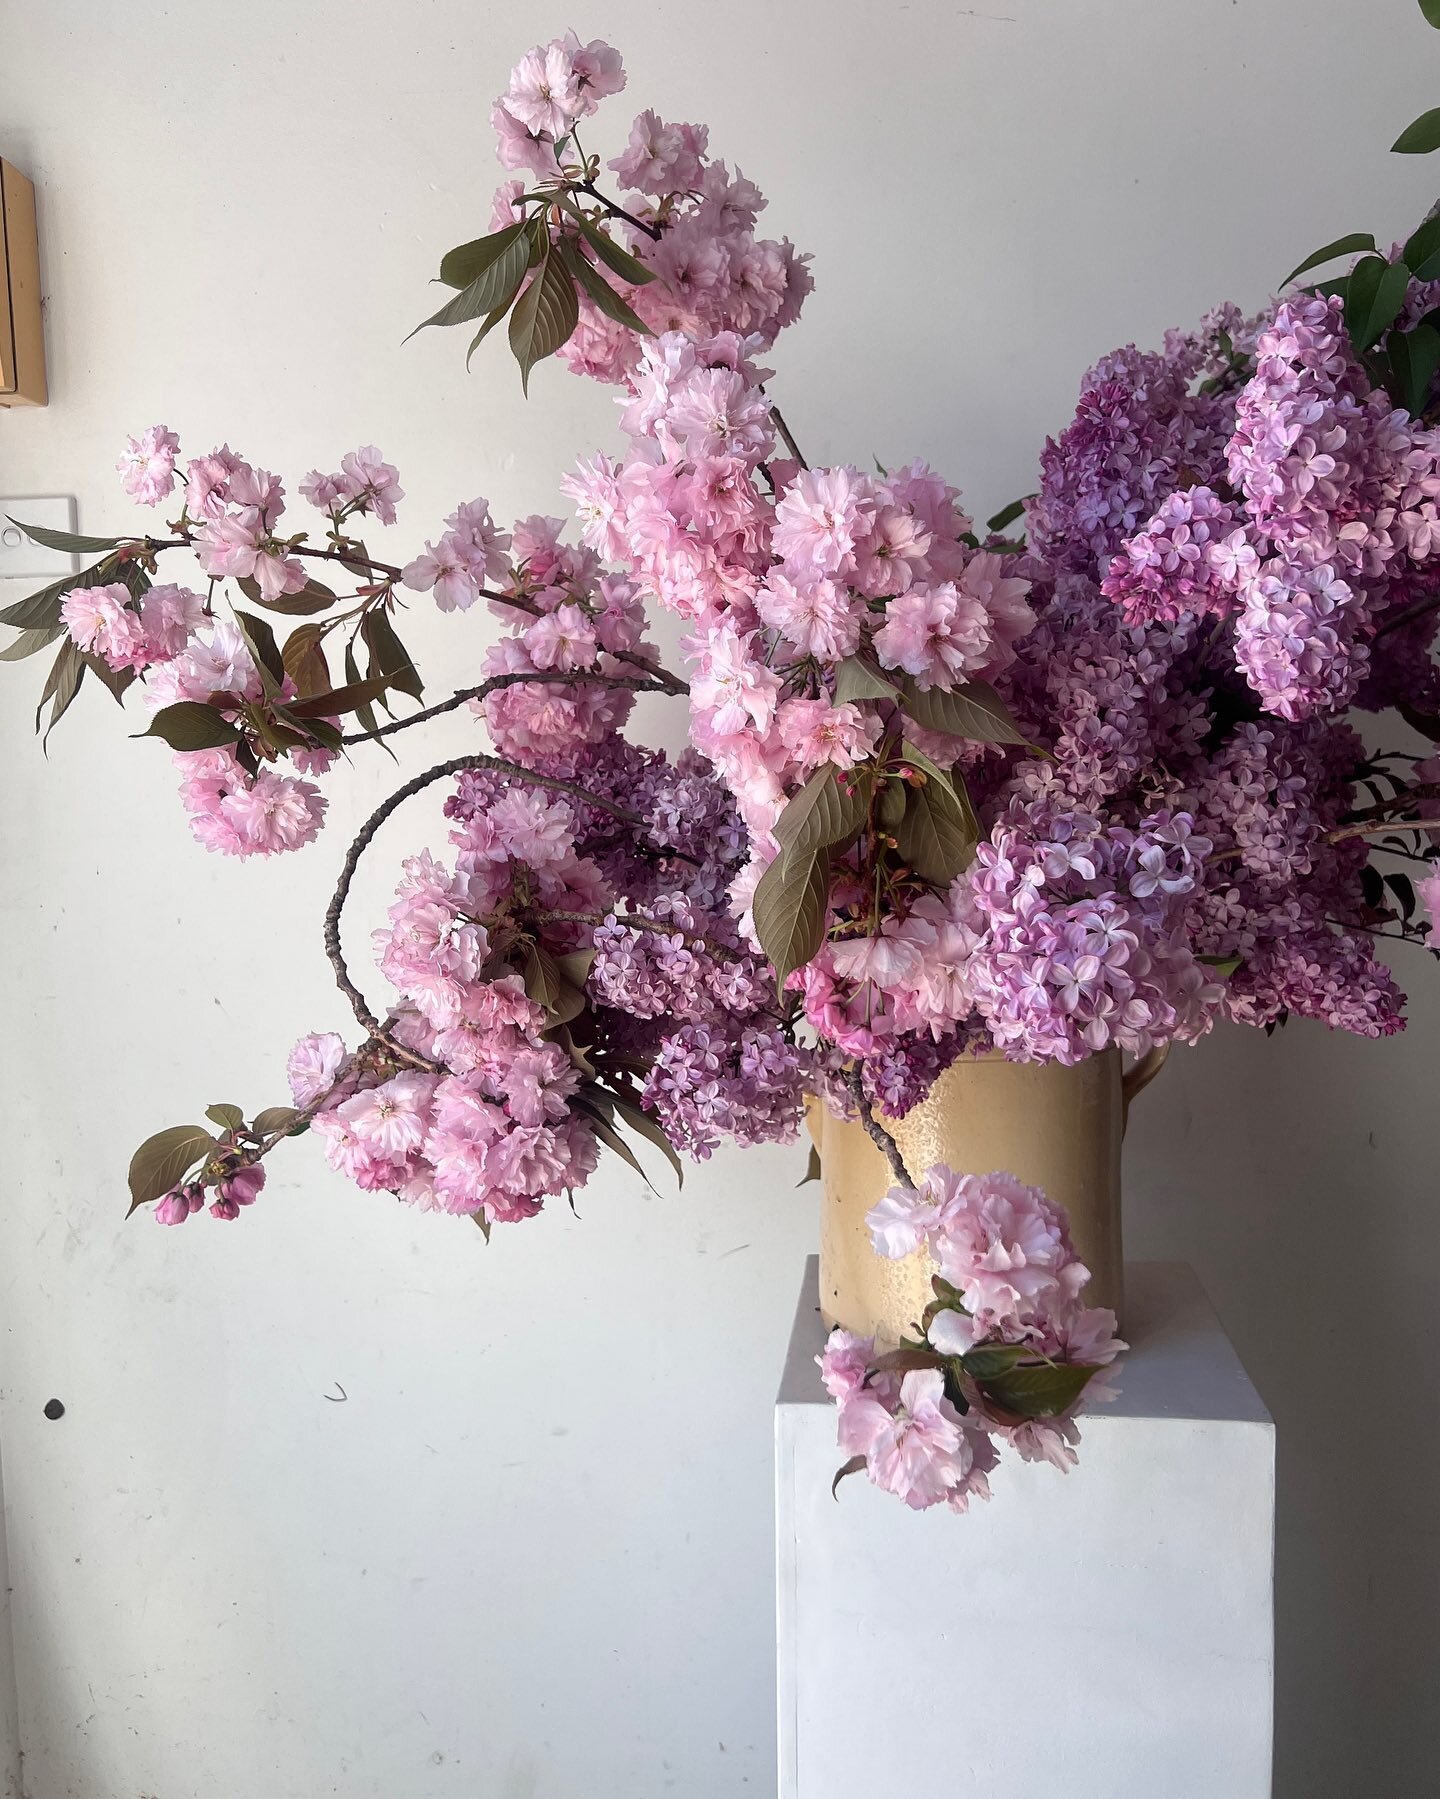 Lilac, cherry blossom &amp; a beautiful old confit pot